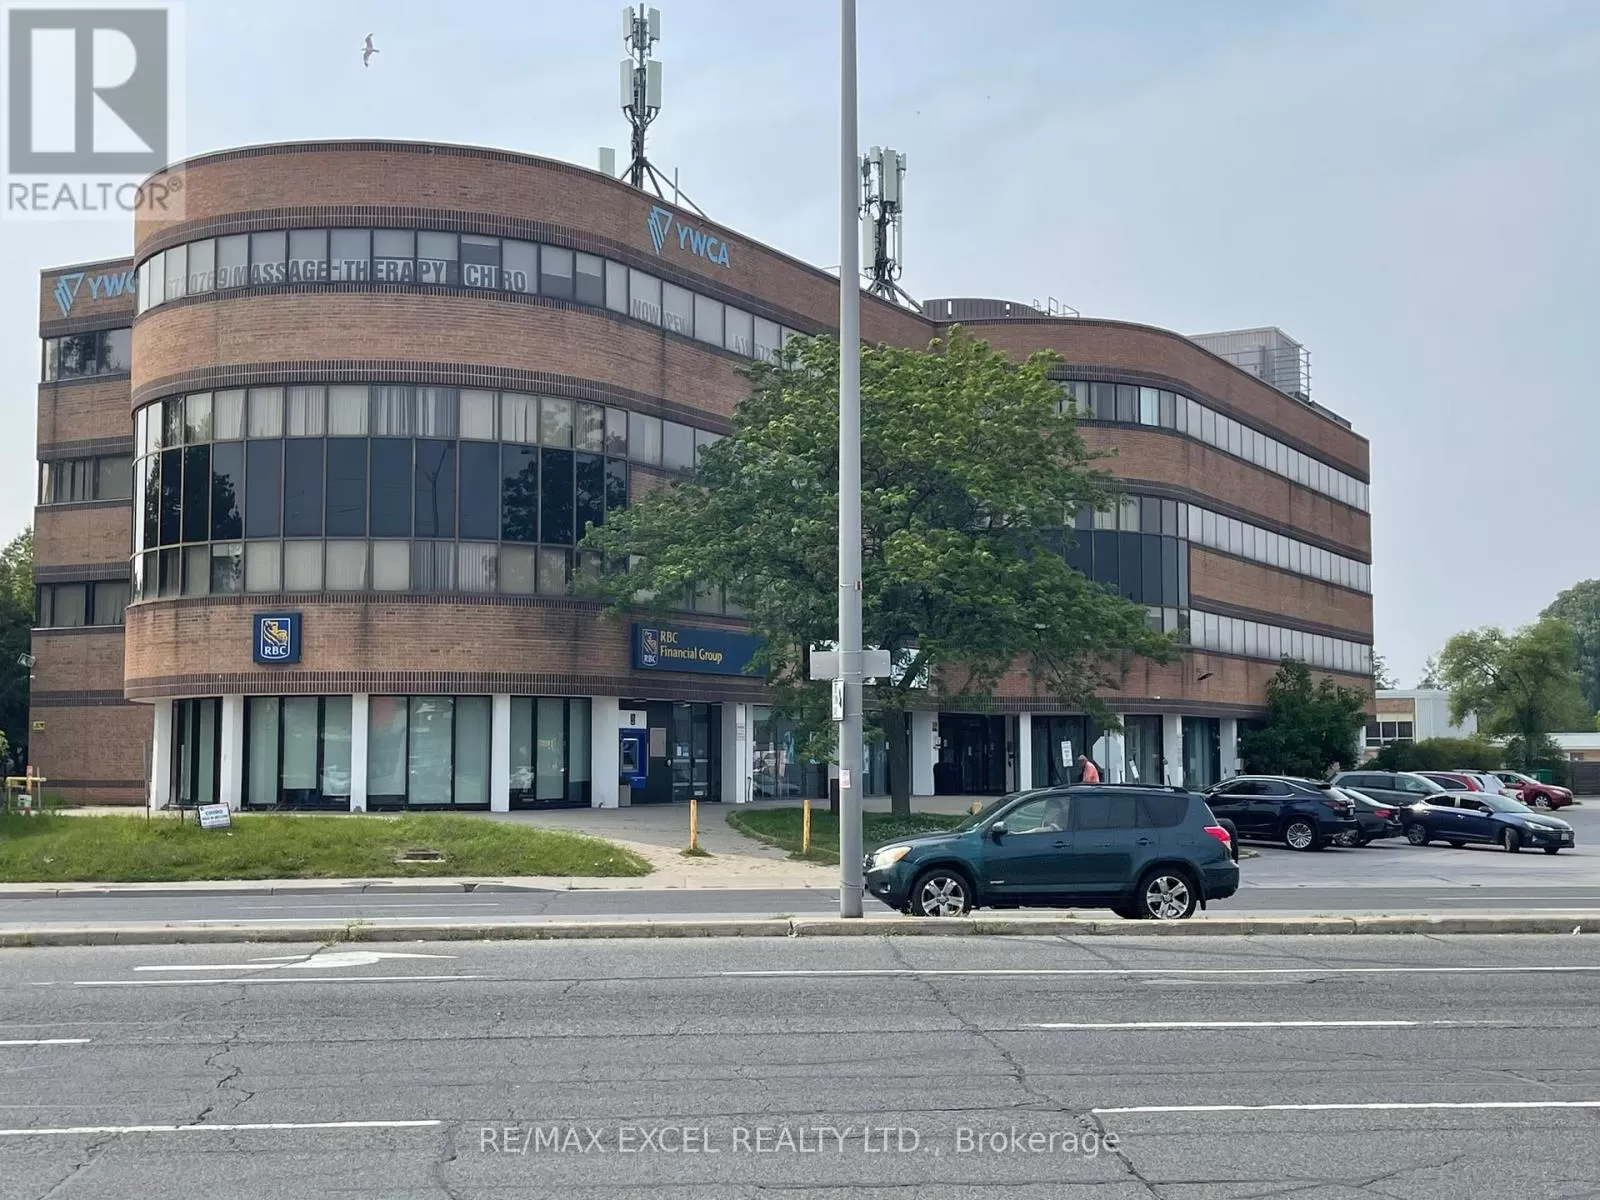 Offices for rent: 403b - 3090 Kingston Road, Toronto, Ontario M1M 1P2